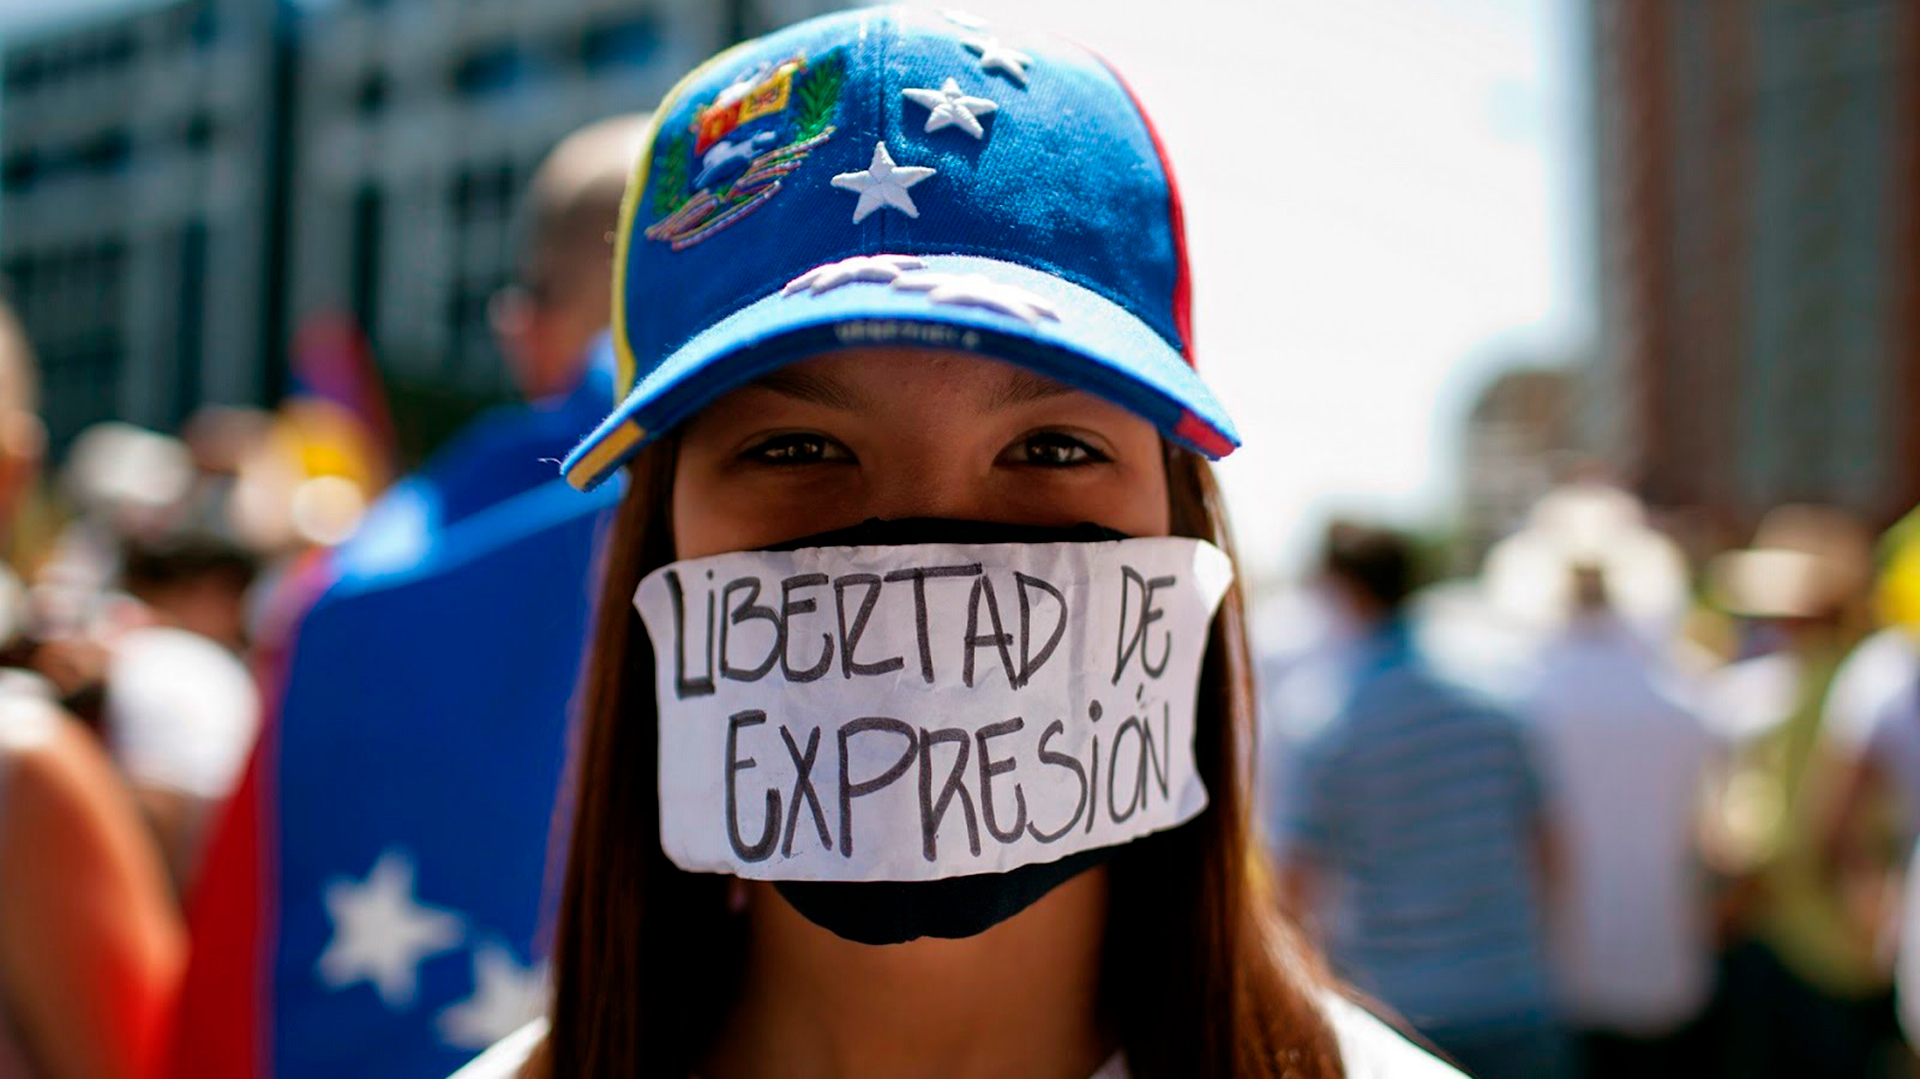 In Venezuela, 28 violations of freedom of expression were recorded during February